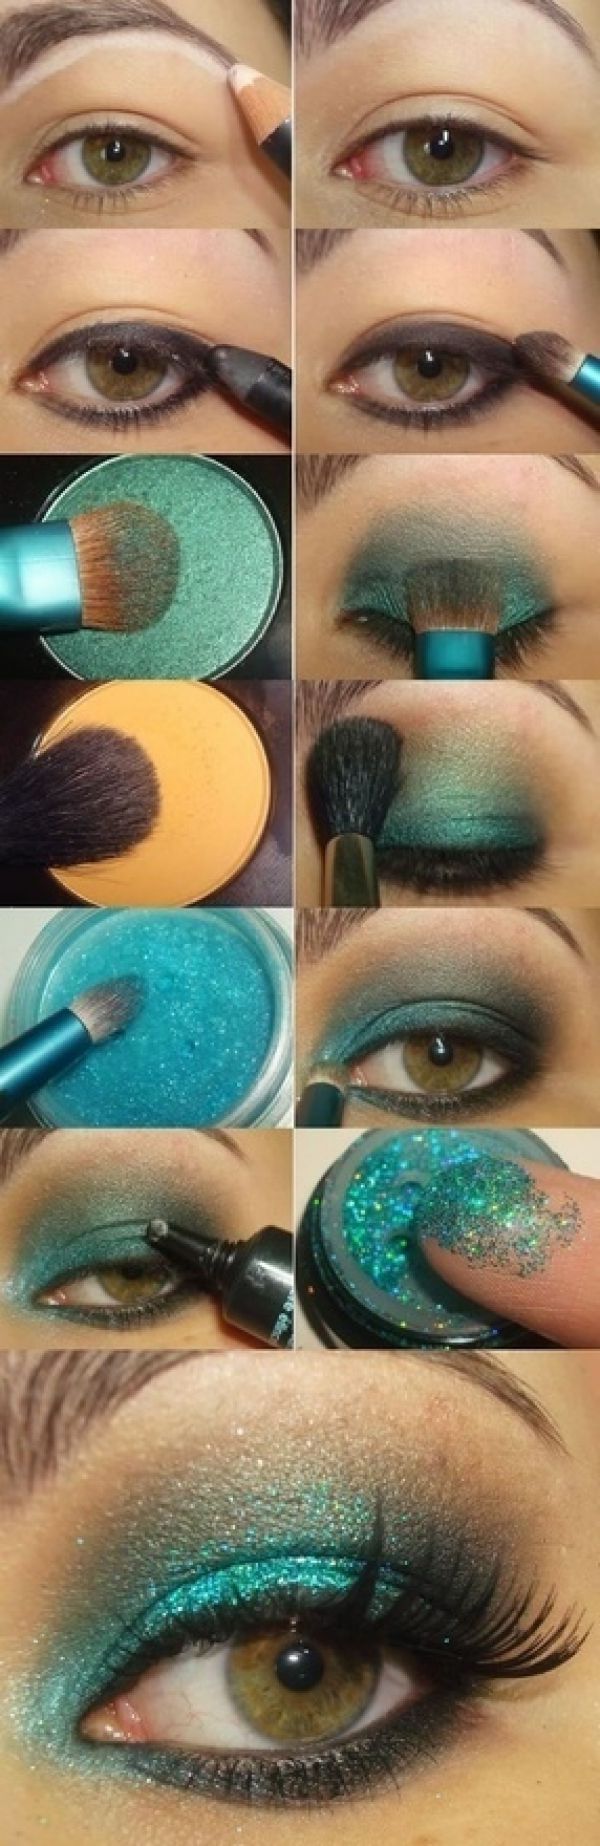 makeup ideas for green eyes (5)